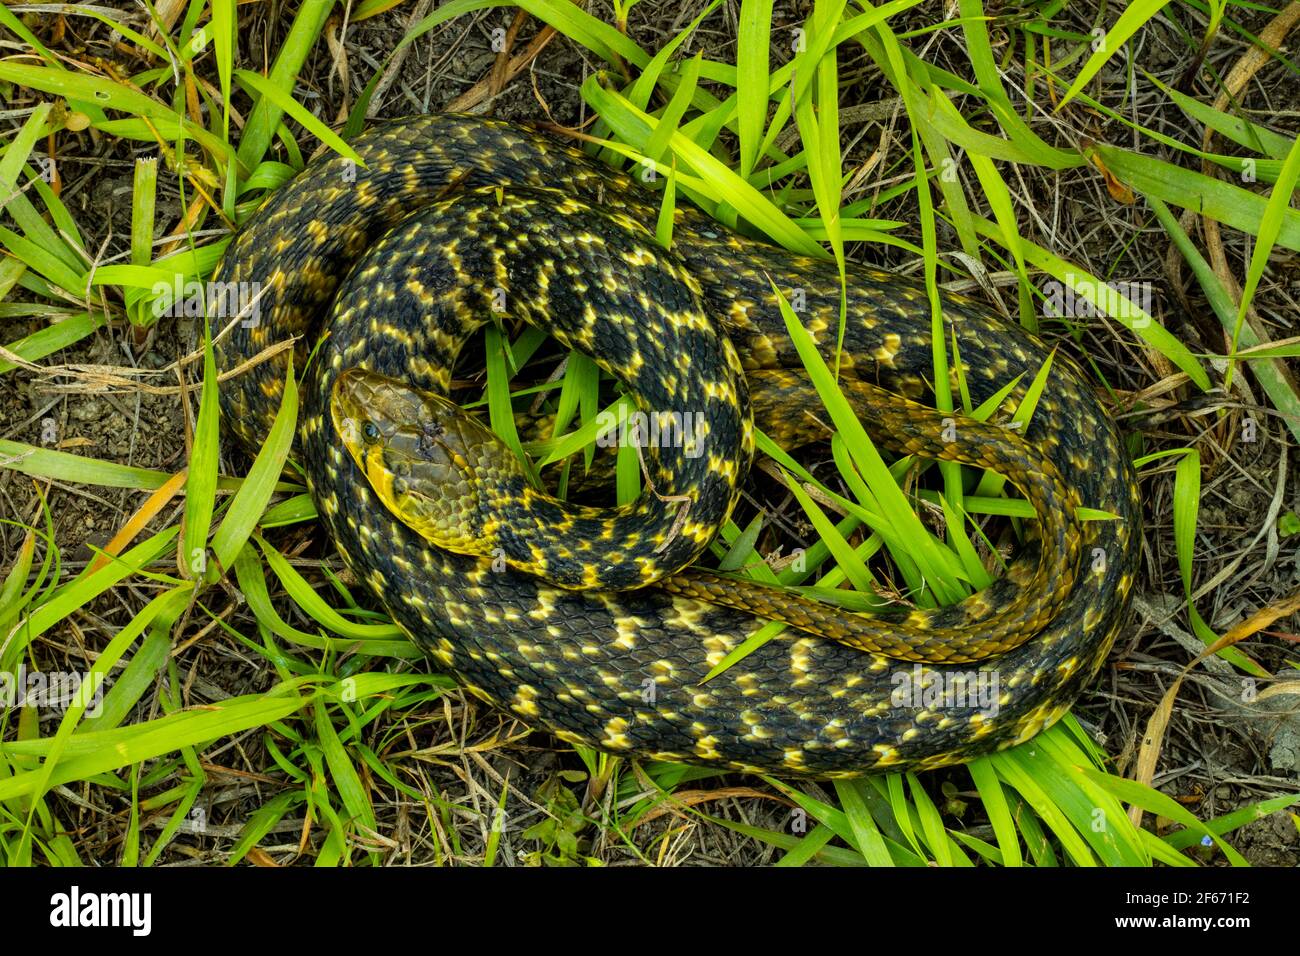 On top black gray and yellow color Amphiesma stolatum or Buff striped keelback snake sitting in the green grass in the morning Stock Photo